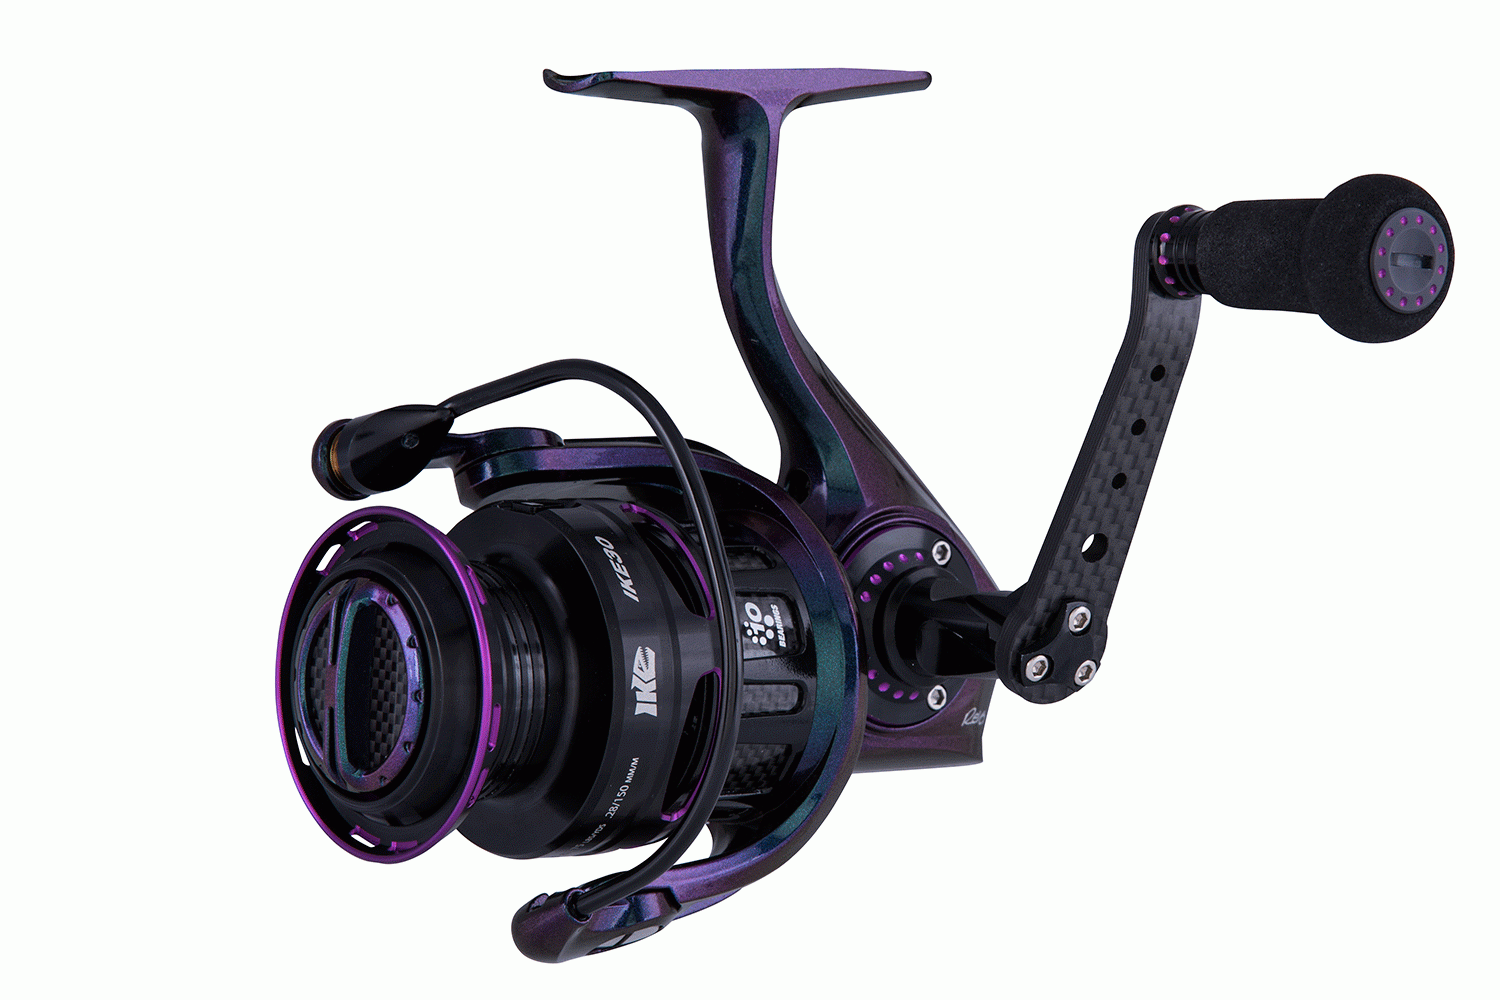 <p><b>Abu Garcia Revo Ike Signature Spinning Reels, $229.95</b></p> Mike Iaconelli, one of the most recognized professional freshwater bass anglers, and Abu Garcia have teamed up to create a unique series of Ike designed products tailored to the avid bass angler. The Abu Garcia Ike Series leverages Iaconelliâs angling expertise to deliver spinning reels designed with Ikeâs unmistakable cosmetics. <br> <a href=